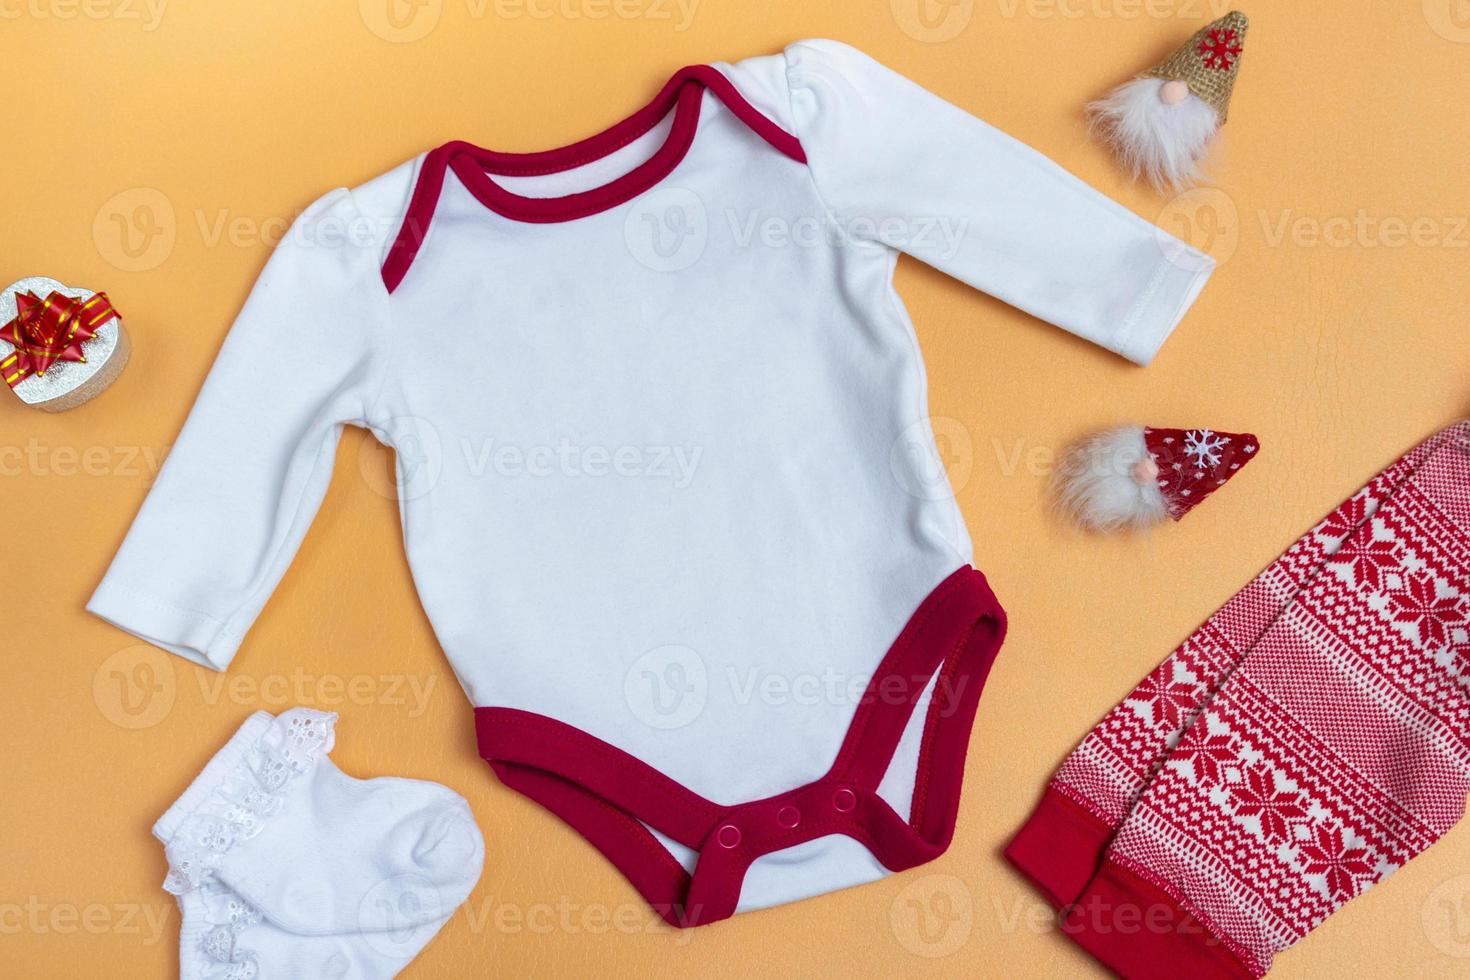 Mockup of a white baby bodysuit on a colored background close-up with red pants and gnomes mockup of clothes for newborns. With copy space photo